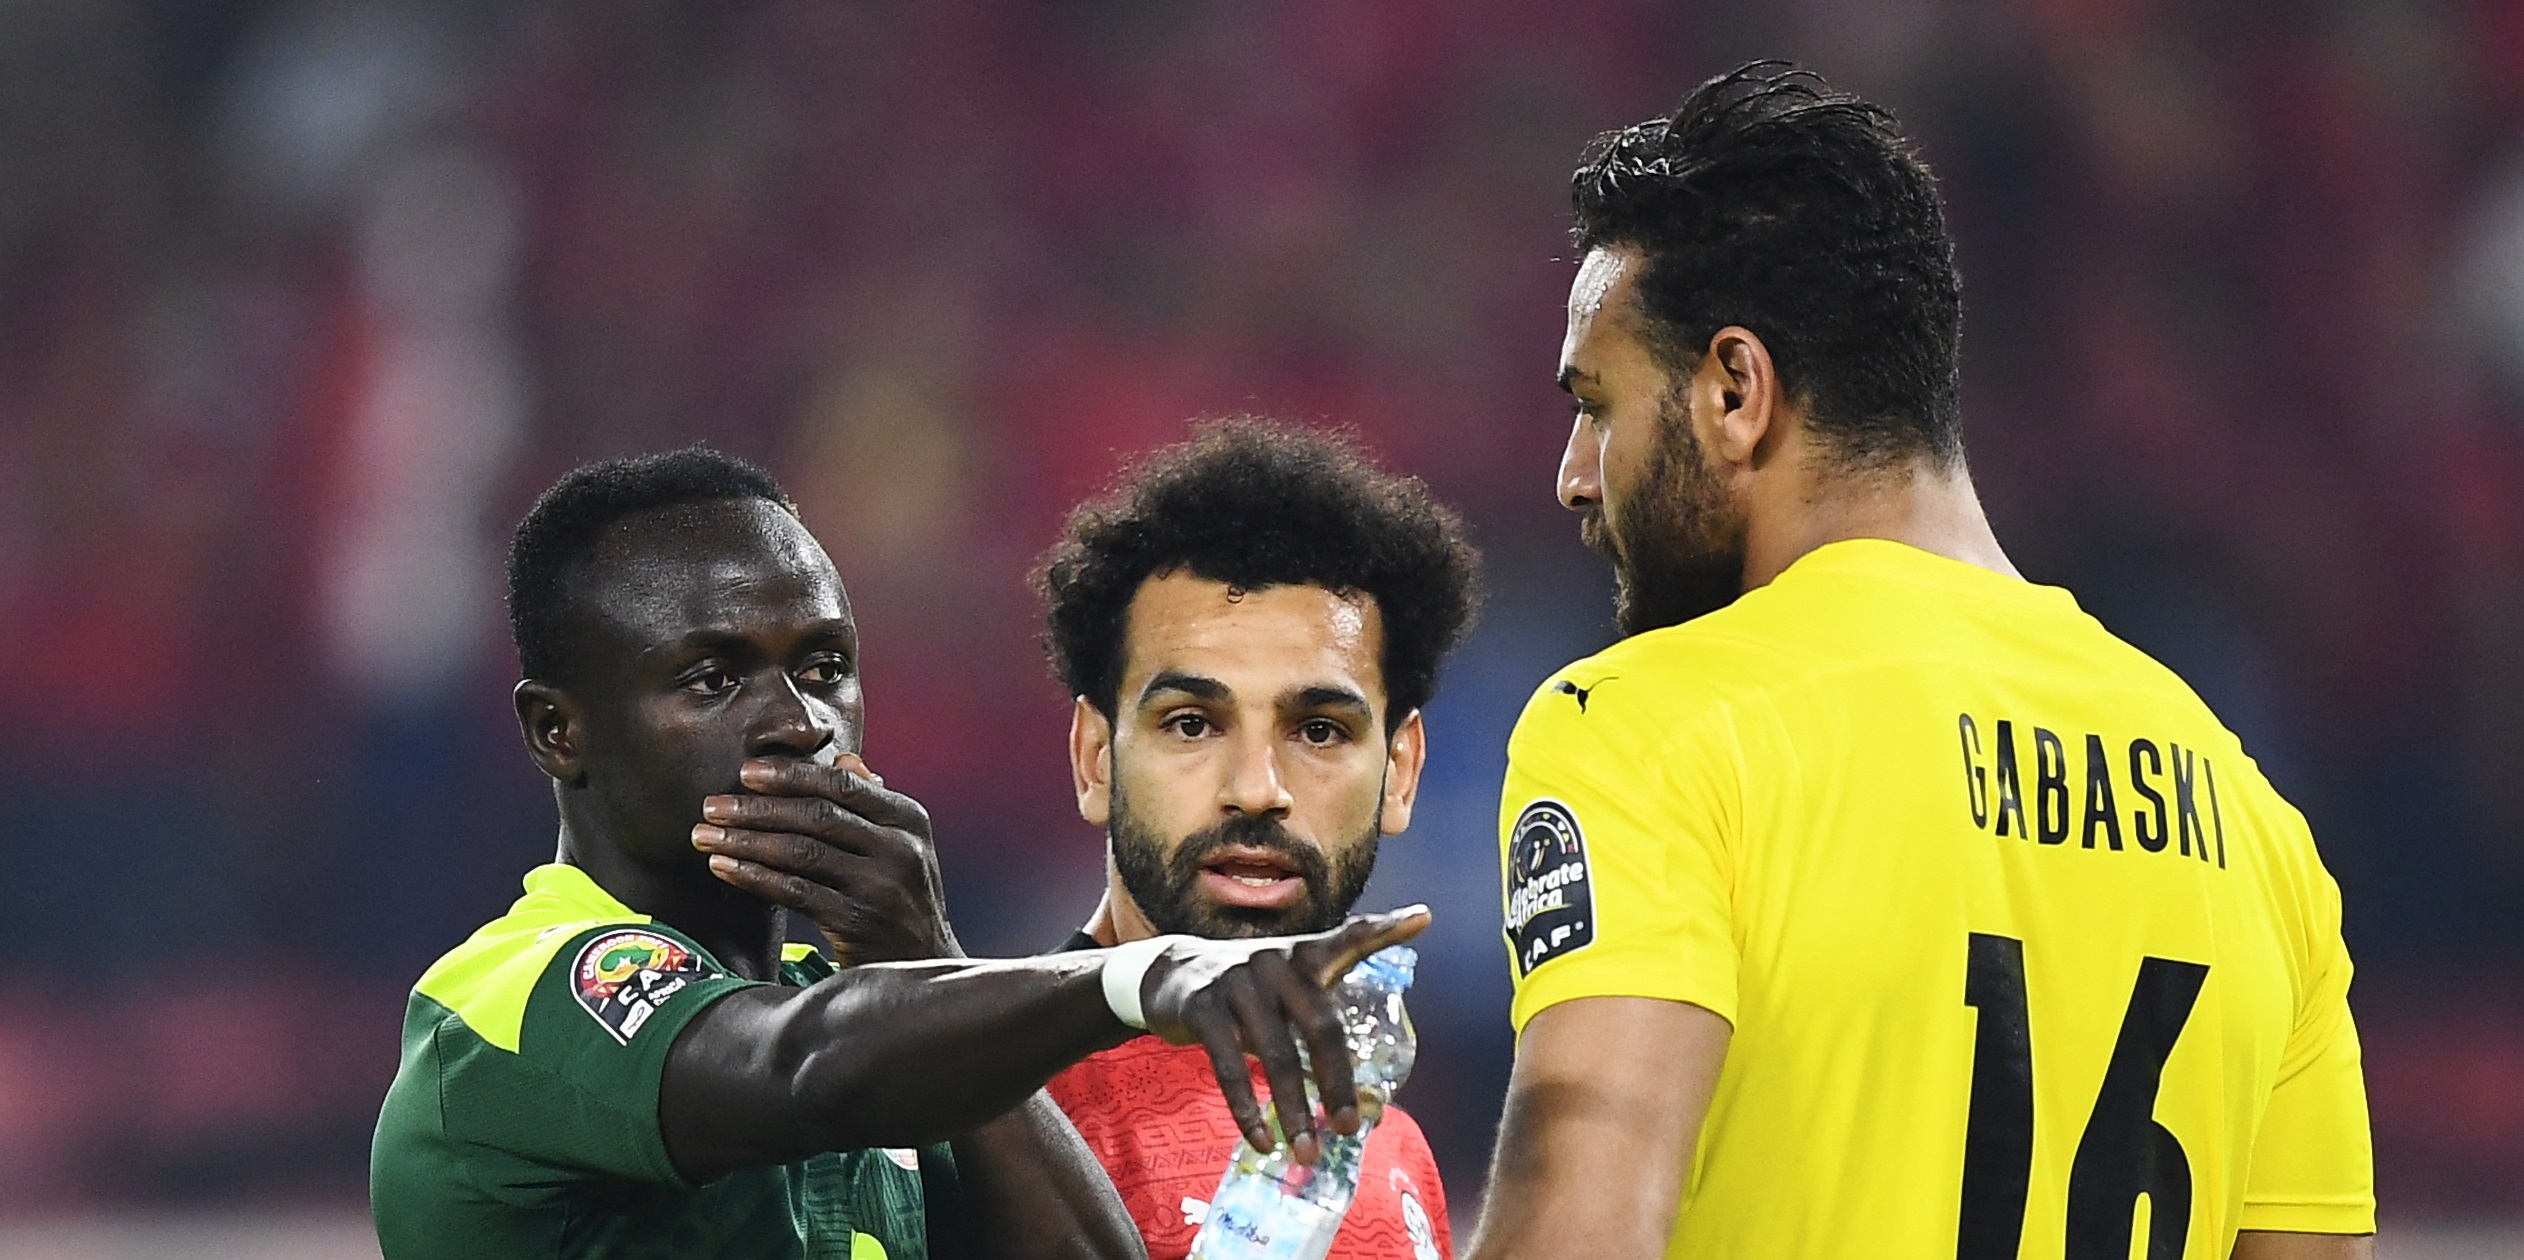 (From L) Senegal's forward Sadio Mane, Egypt's forward Mohamed Salah and Egypt's goalkeeper Mohamed Abogabal speak before the penalty kick during the Africa Cup of Nations (CAN) 2021 final football match between Senegal and Egypt at Stade d'Olembe in Yaounde on February 6, 2022. (Photo by CHARLY TRIBALLEAU / AFP) (Photo by CHARLY TRIBALLEAU/AFP via Getty Images)